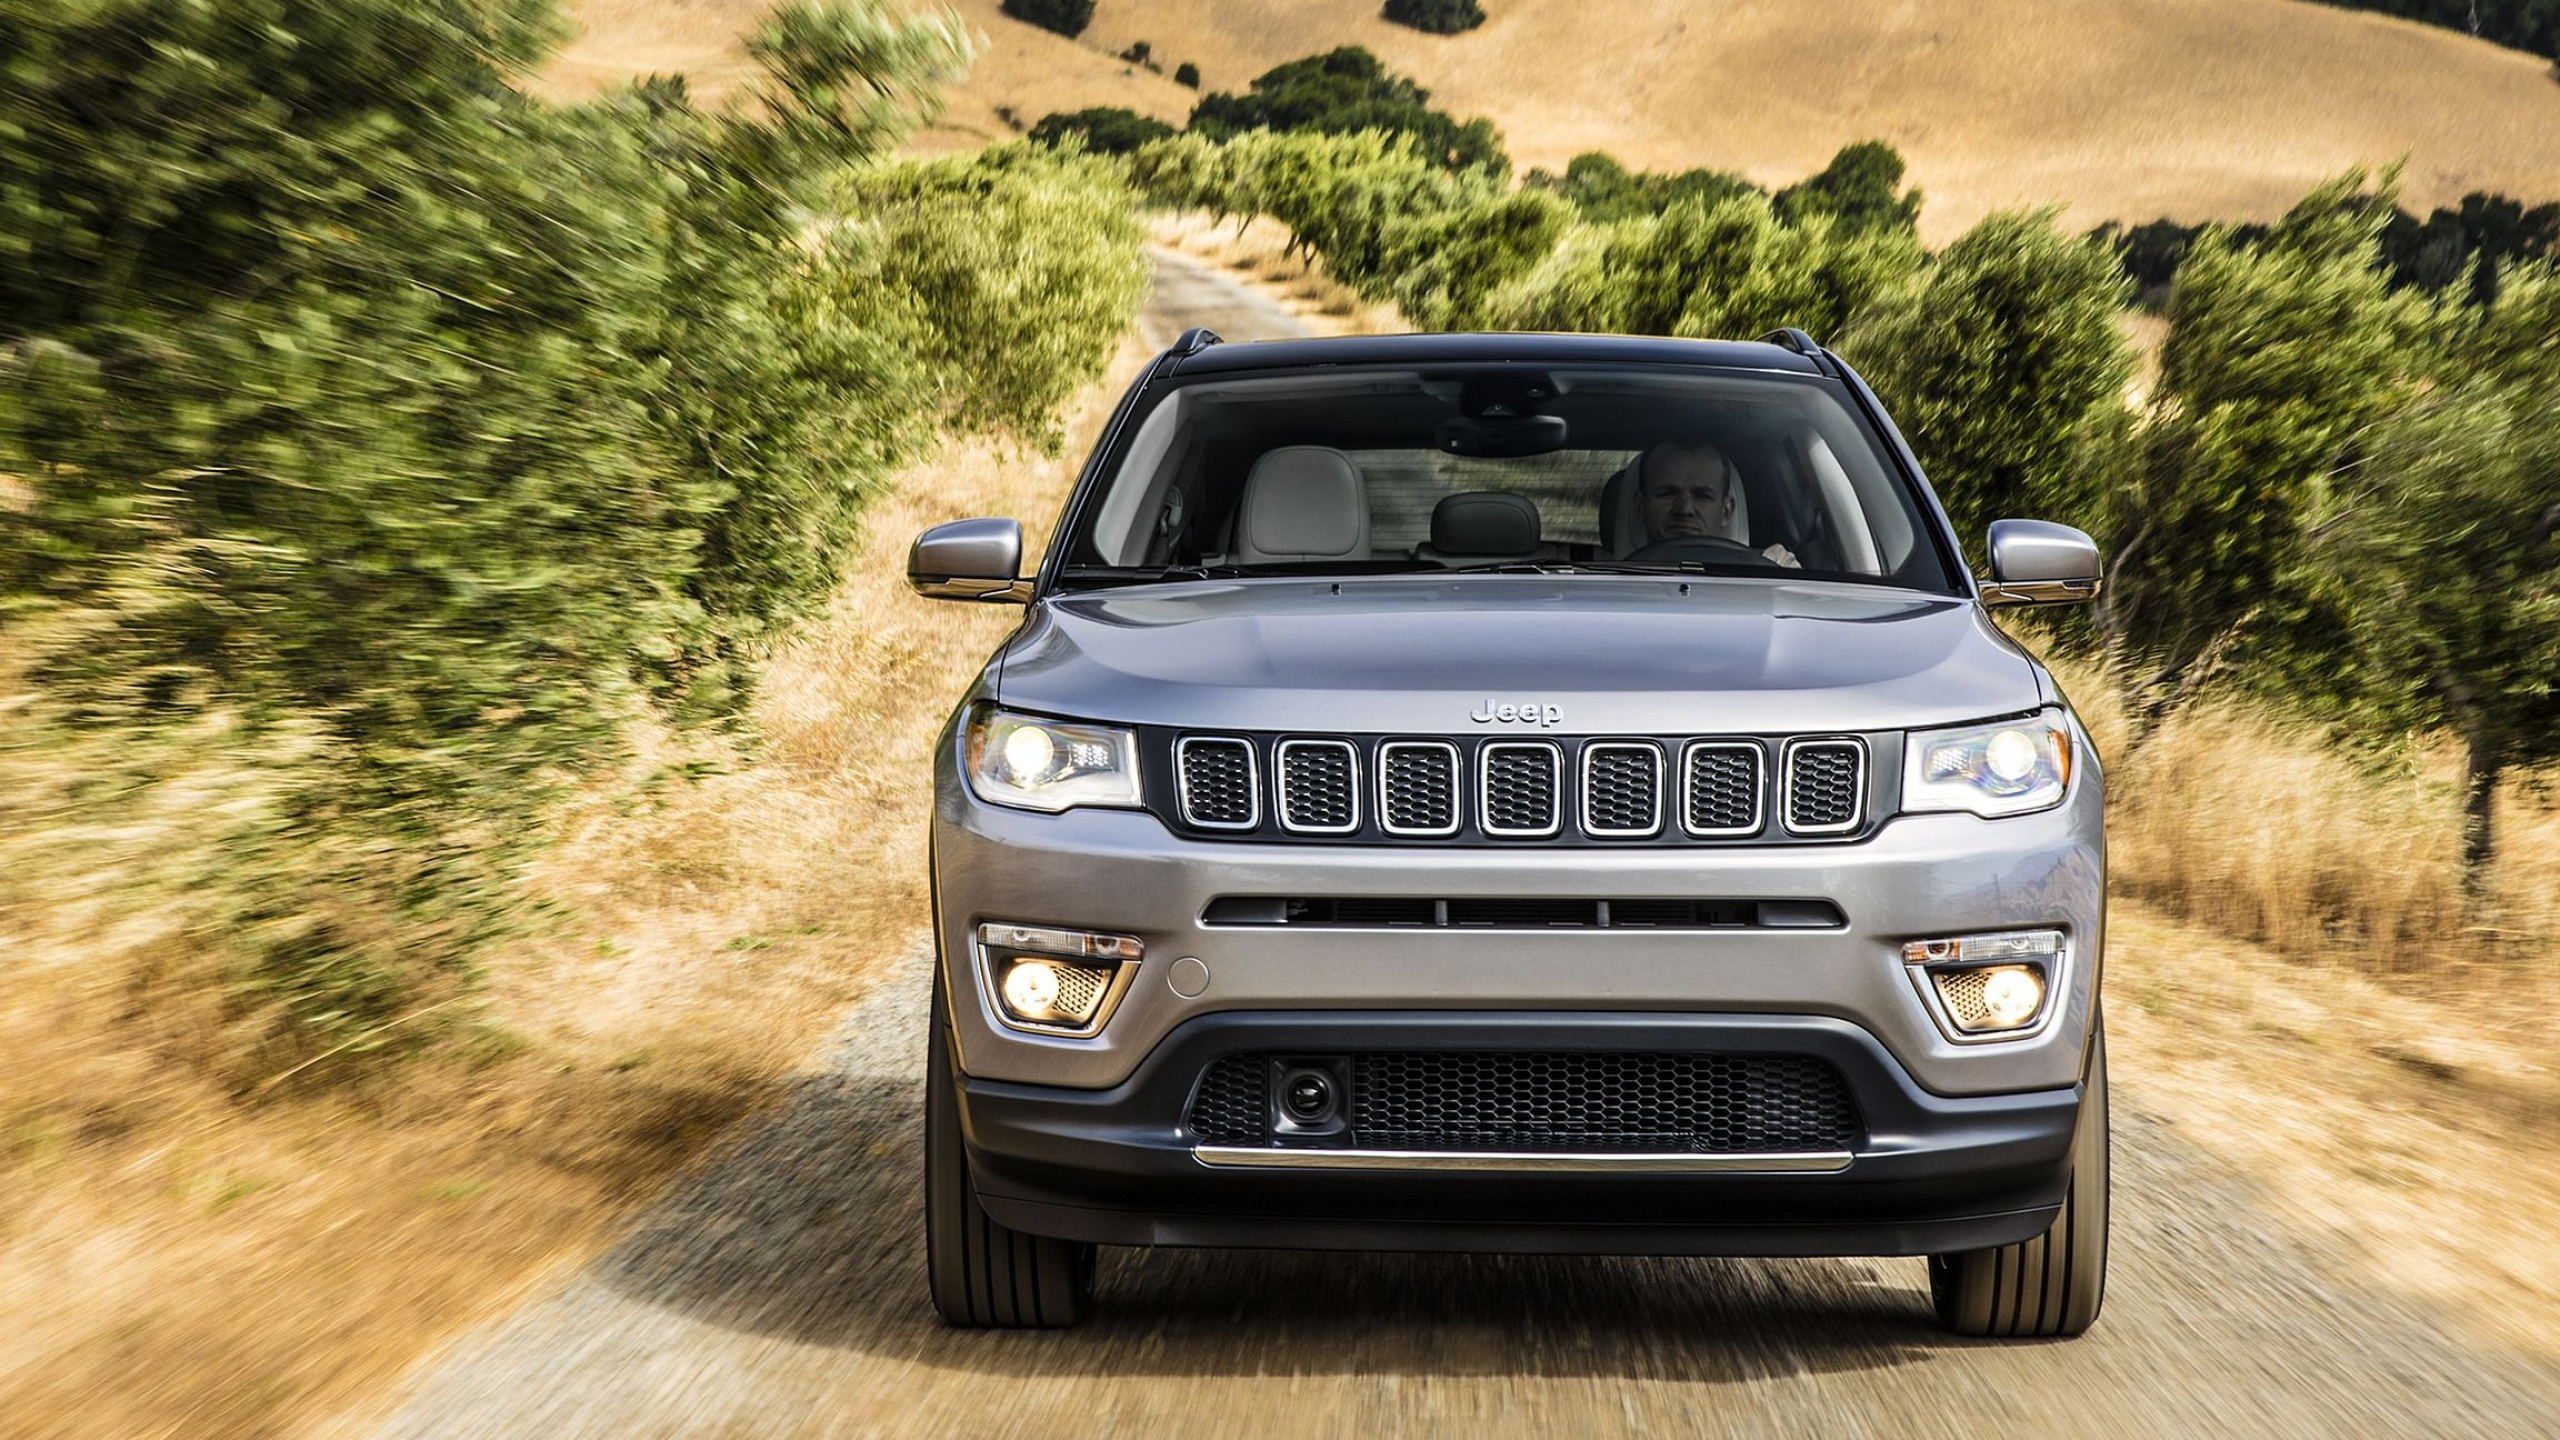 Jeep Compass Trailhawk, Off-road capabilities, Adventure-driven SUV, Exciting performance, 2560x1440 HD Desktop